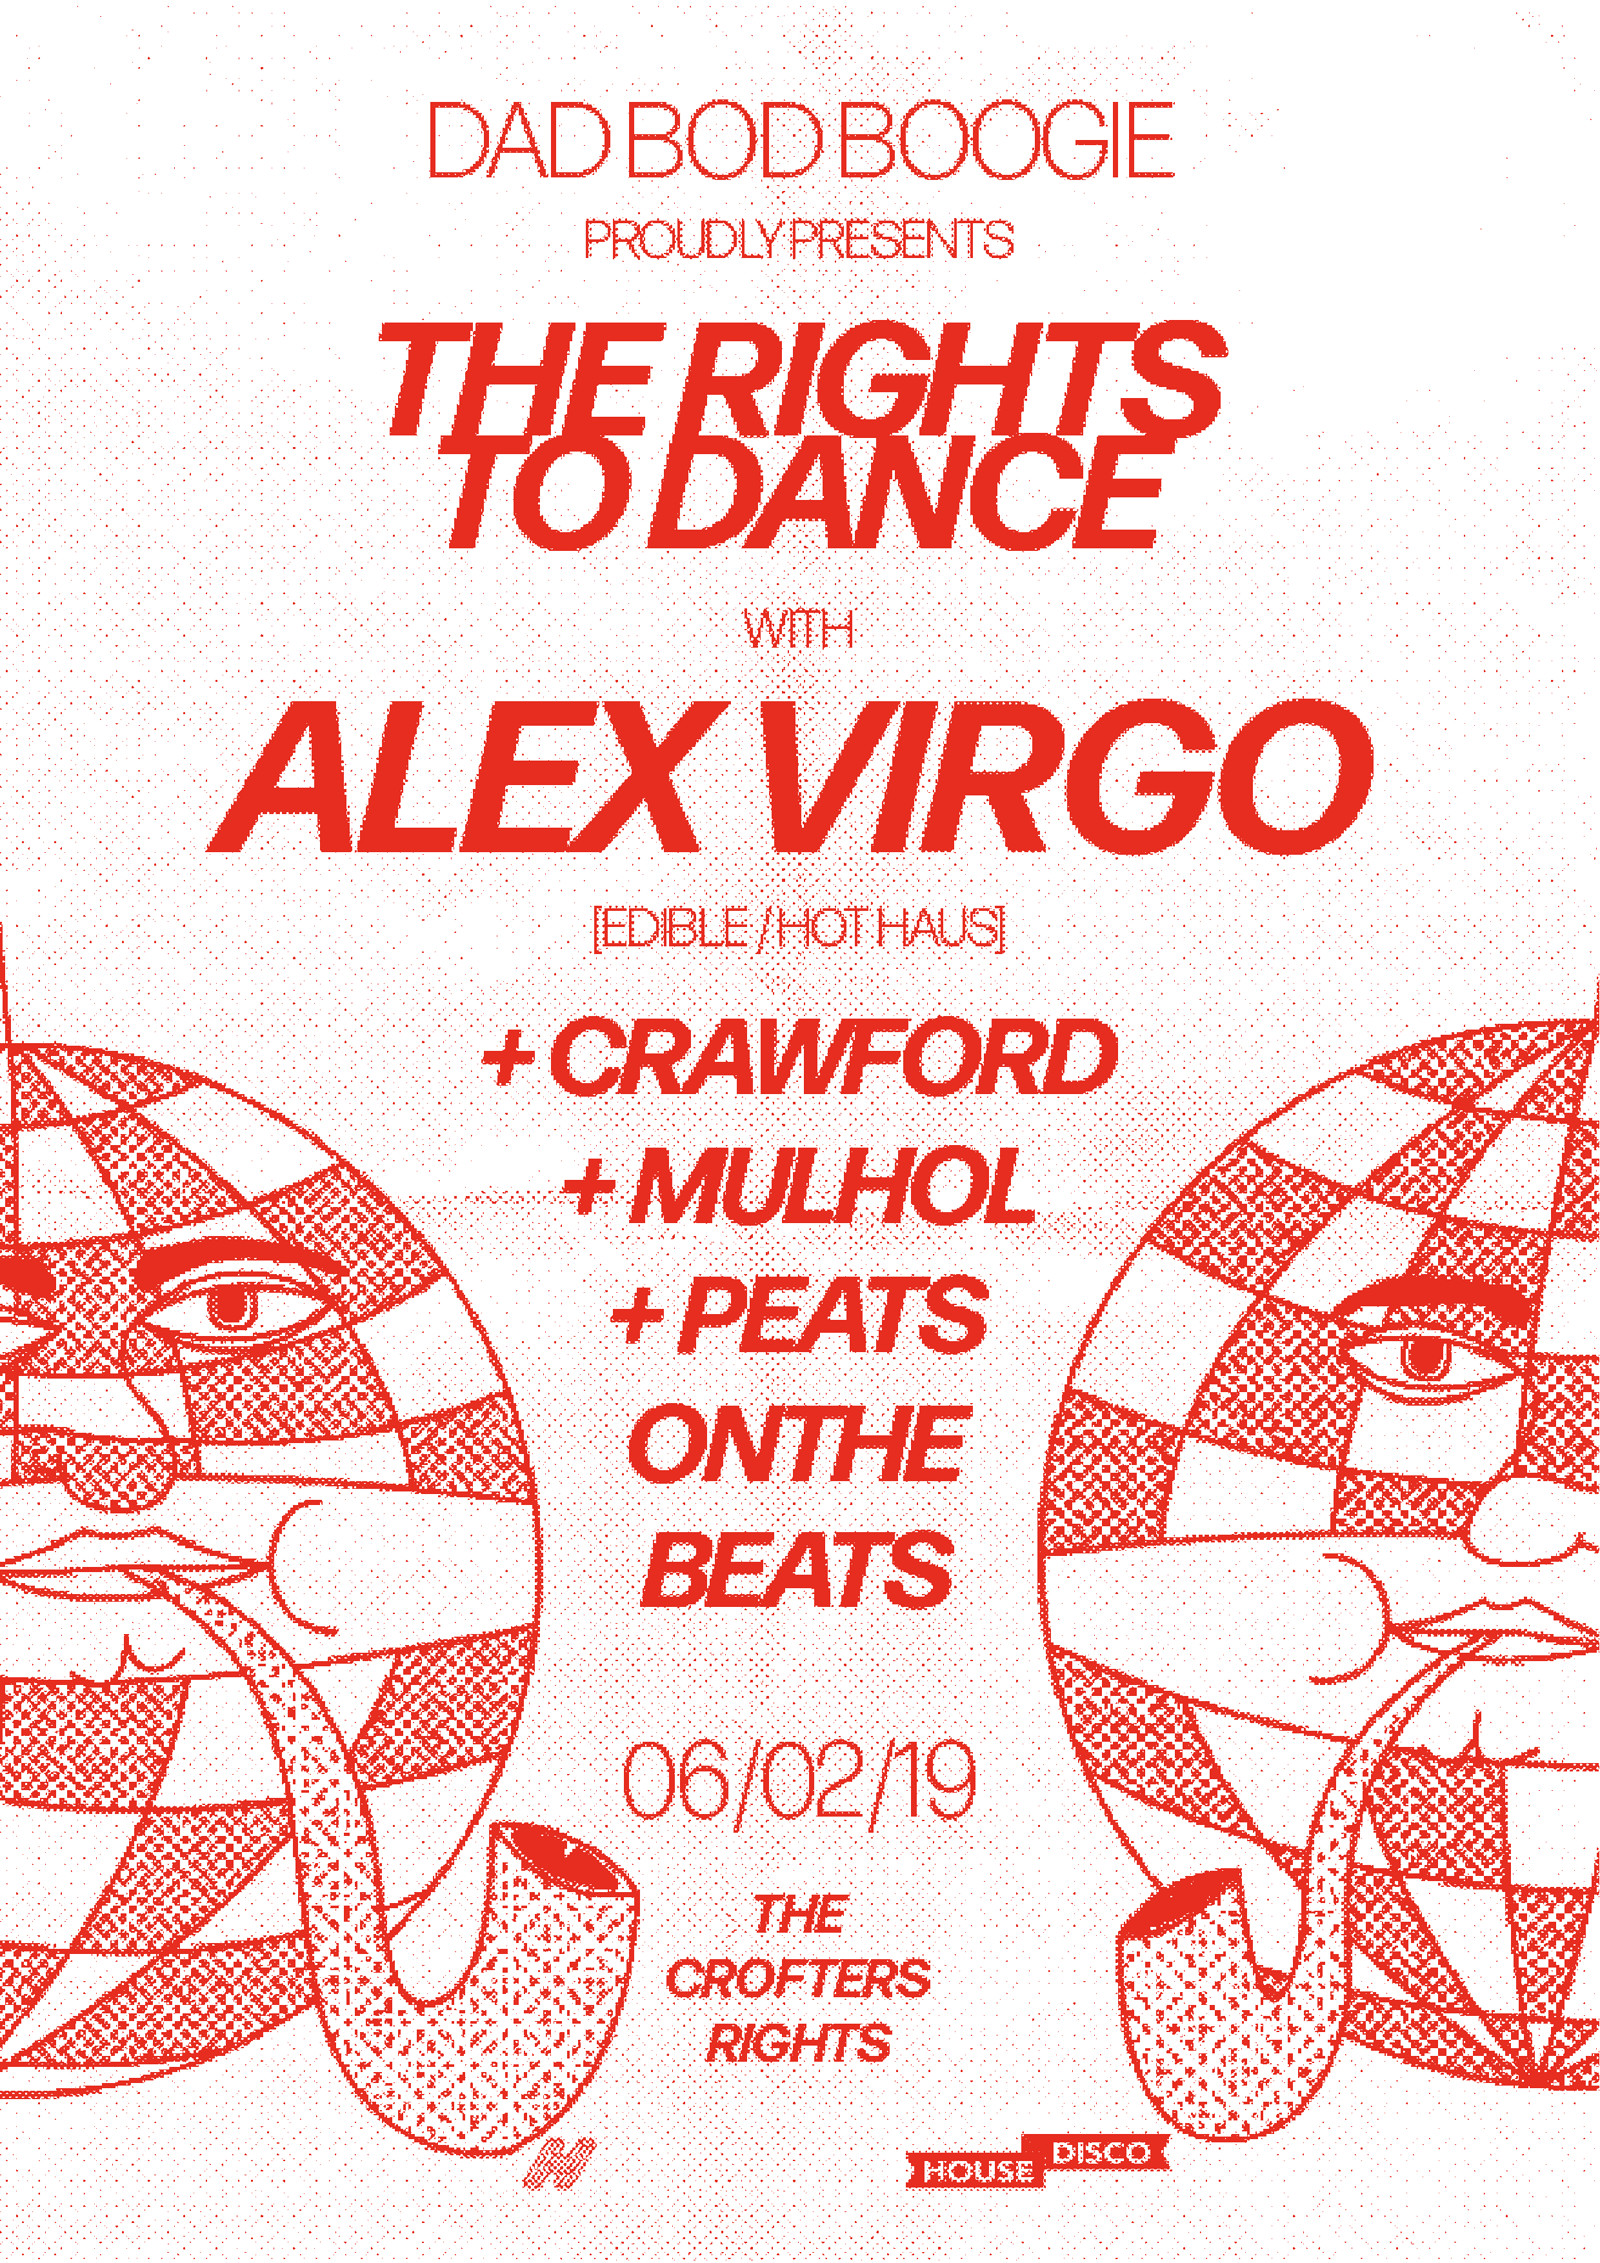 Dad Bod Boogie Presents: The Rights To Dance at Crofters Rights